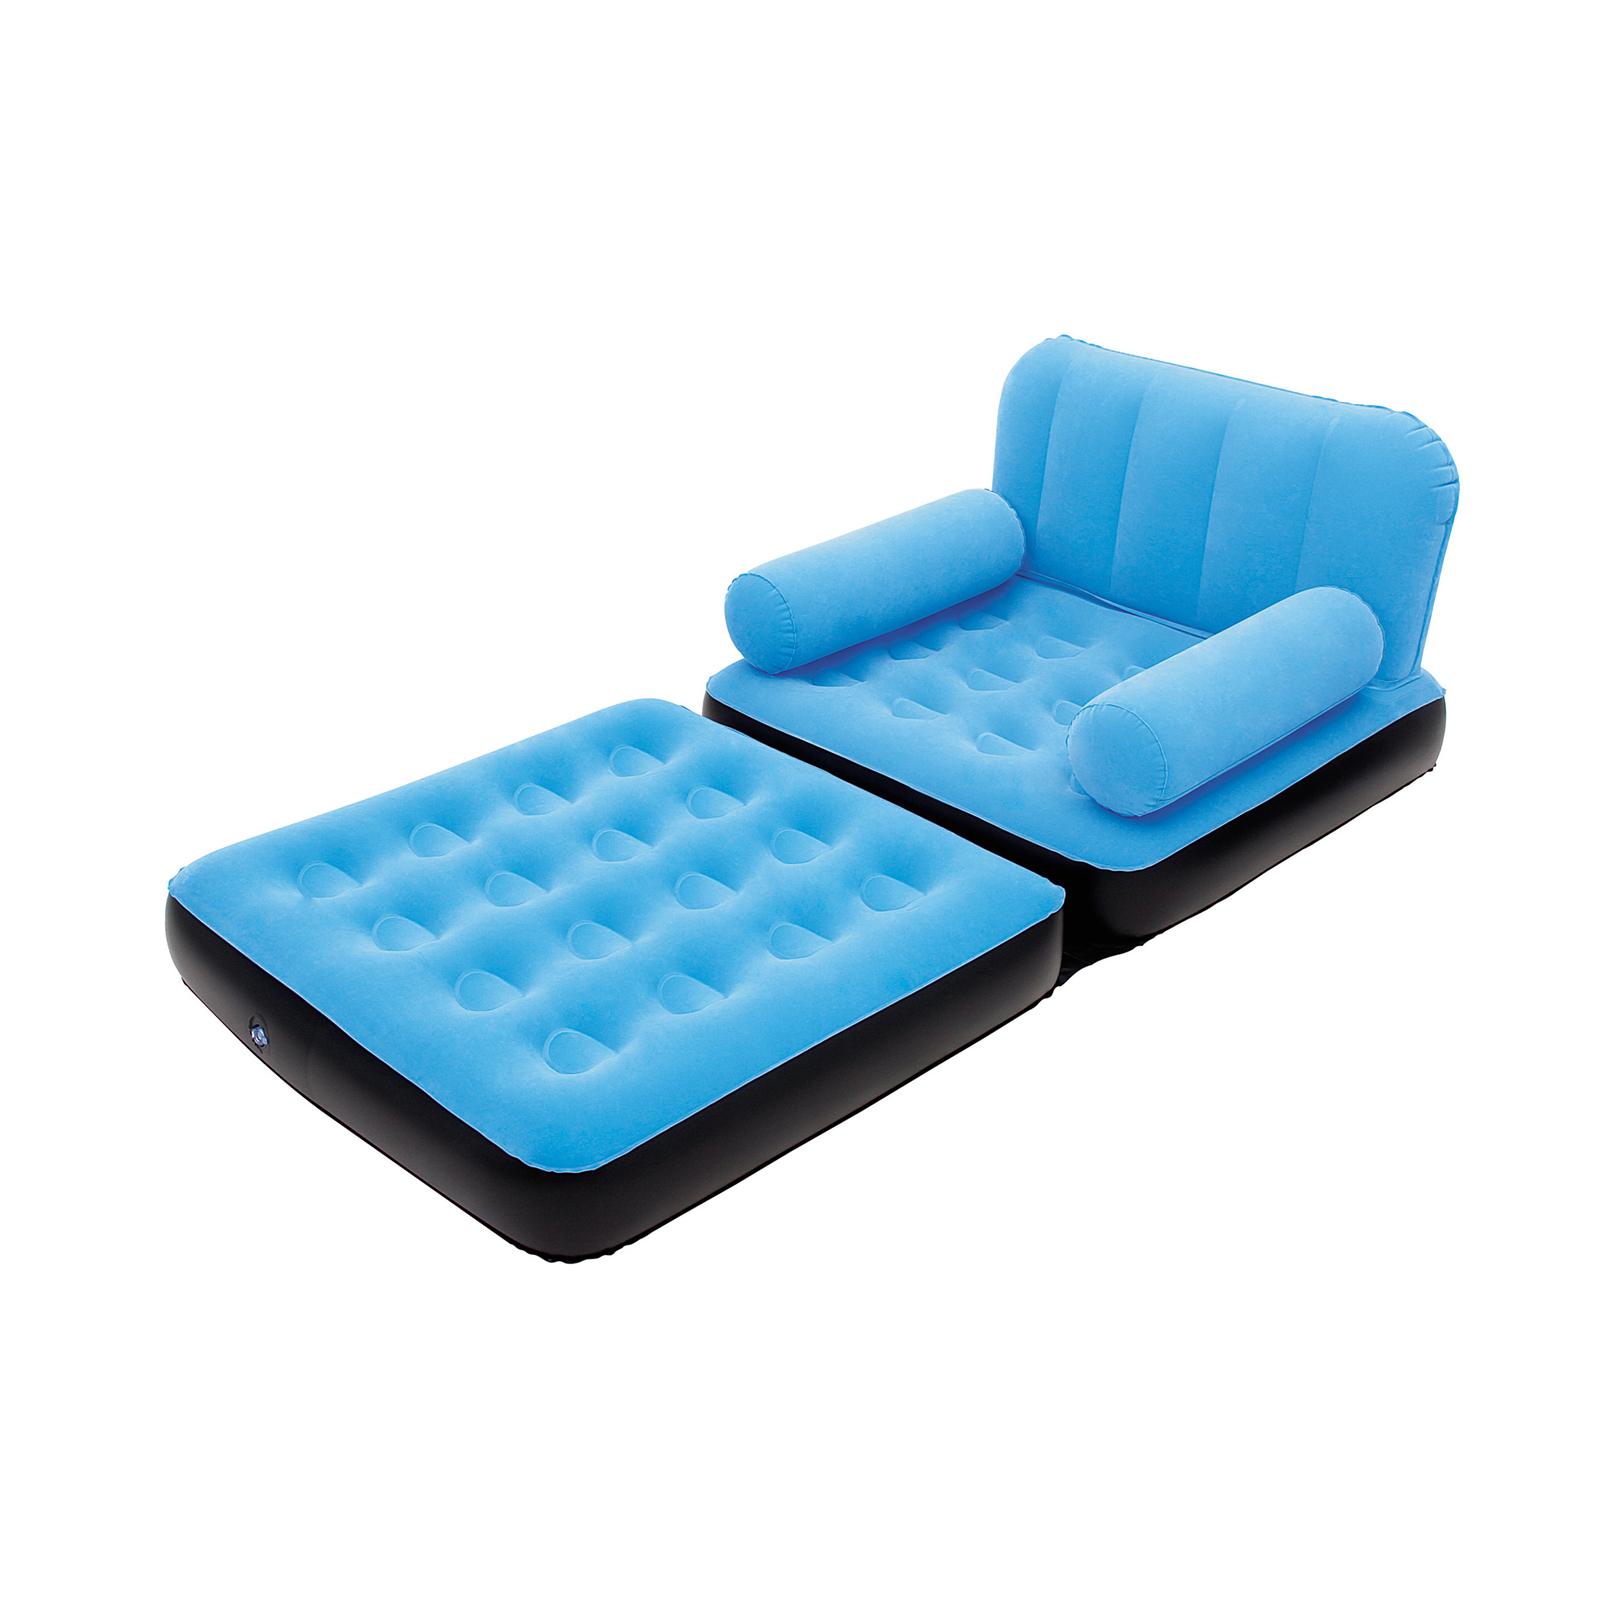 UPC 821808100224 product image for Bestway MultiMax 2-in-1 Chair - Blue | upcitemdb.com